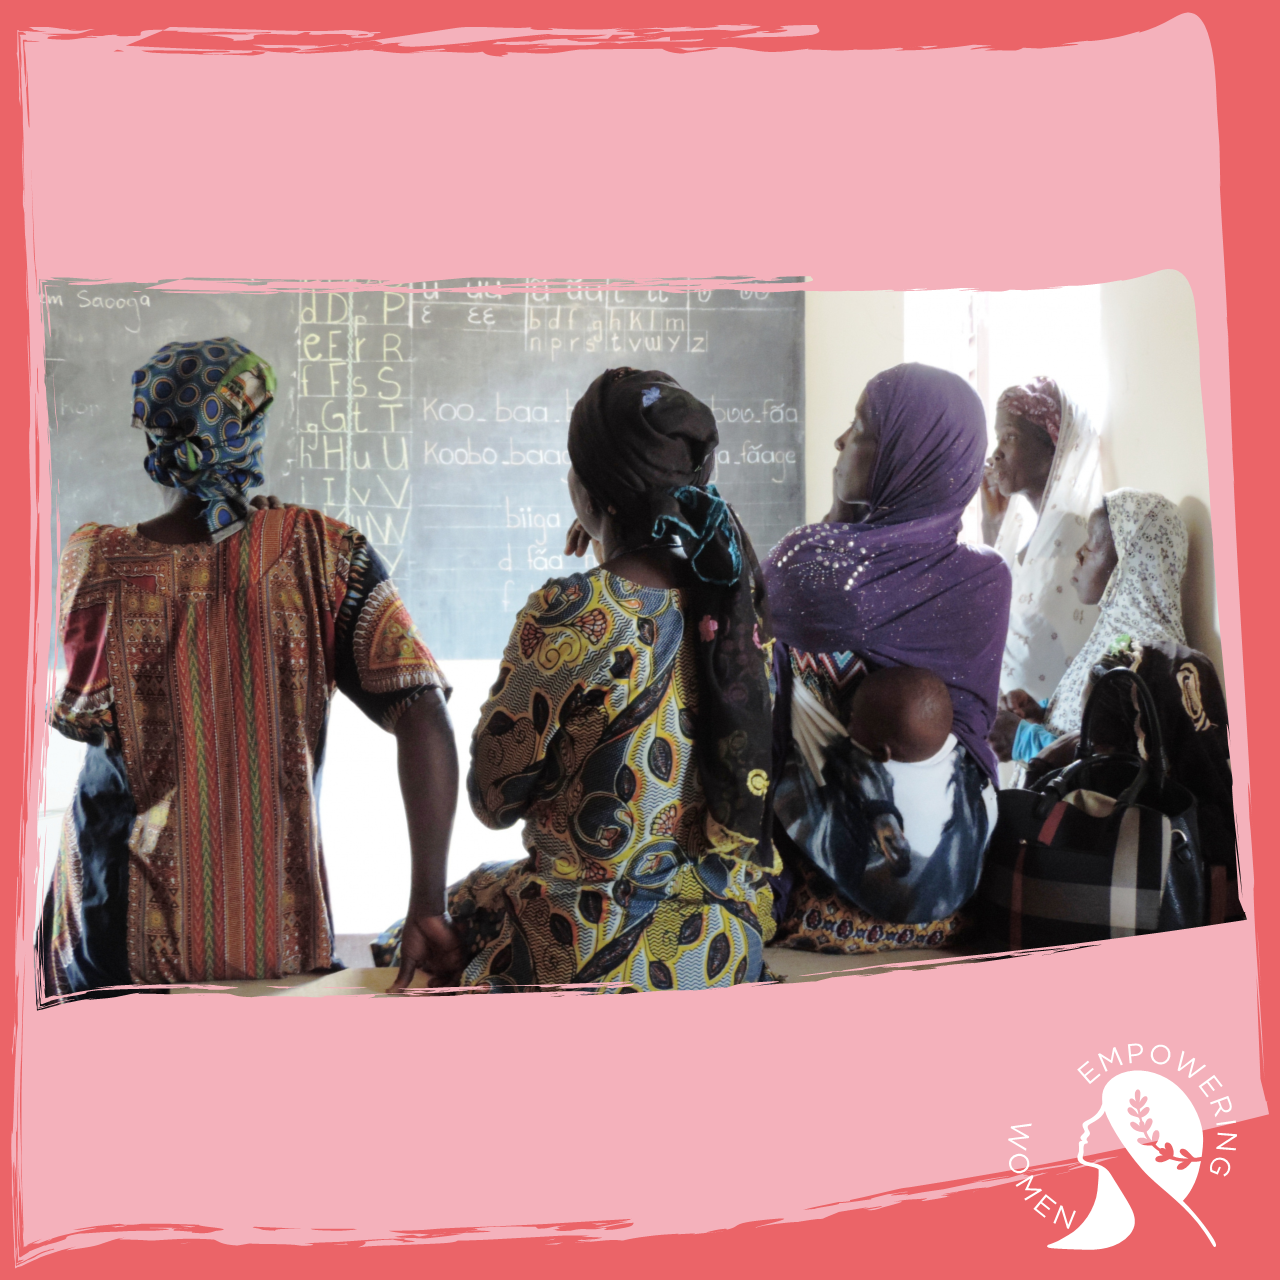 "Literacy has enabled us to know how to manage the income generated by AGRs. It has allowed us to be clean around us and to better educate our children." Focus groups with women beneficiaries in Sapouy.